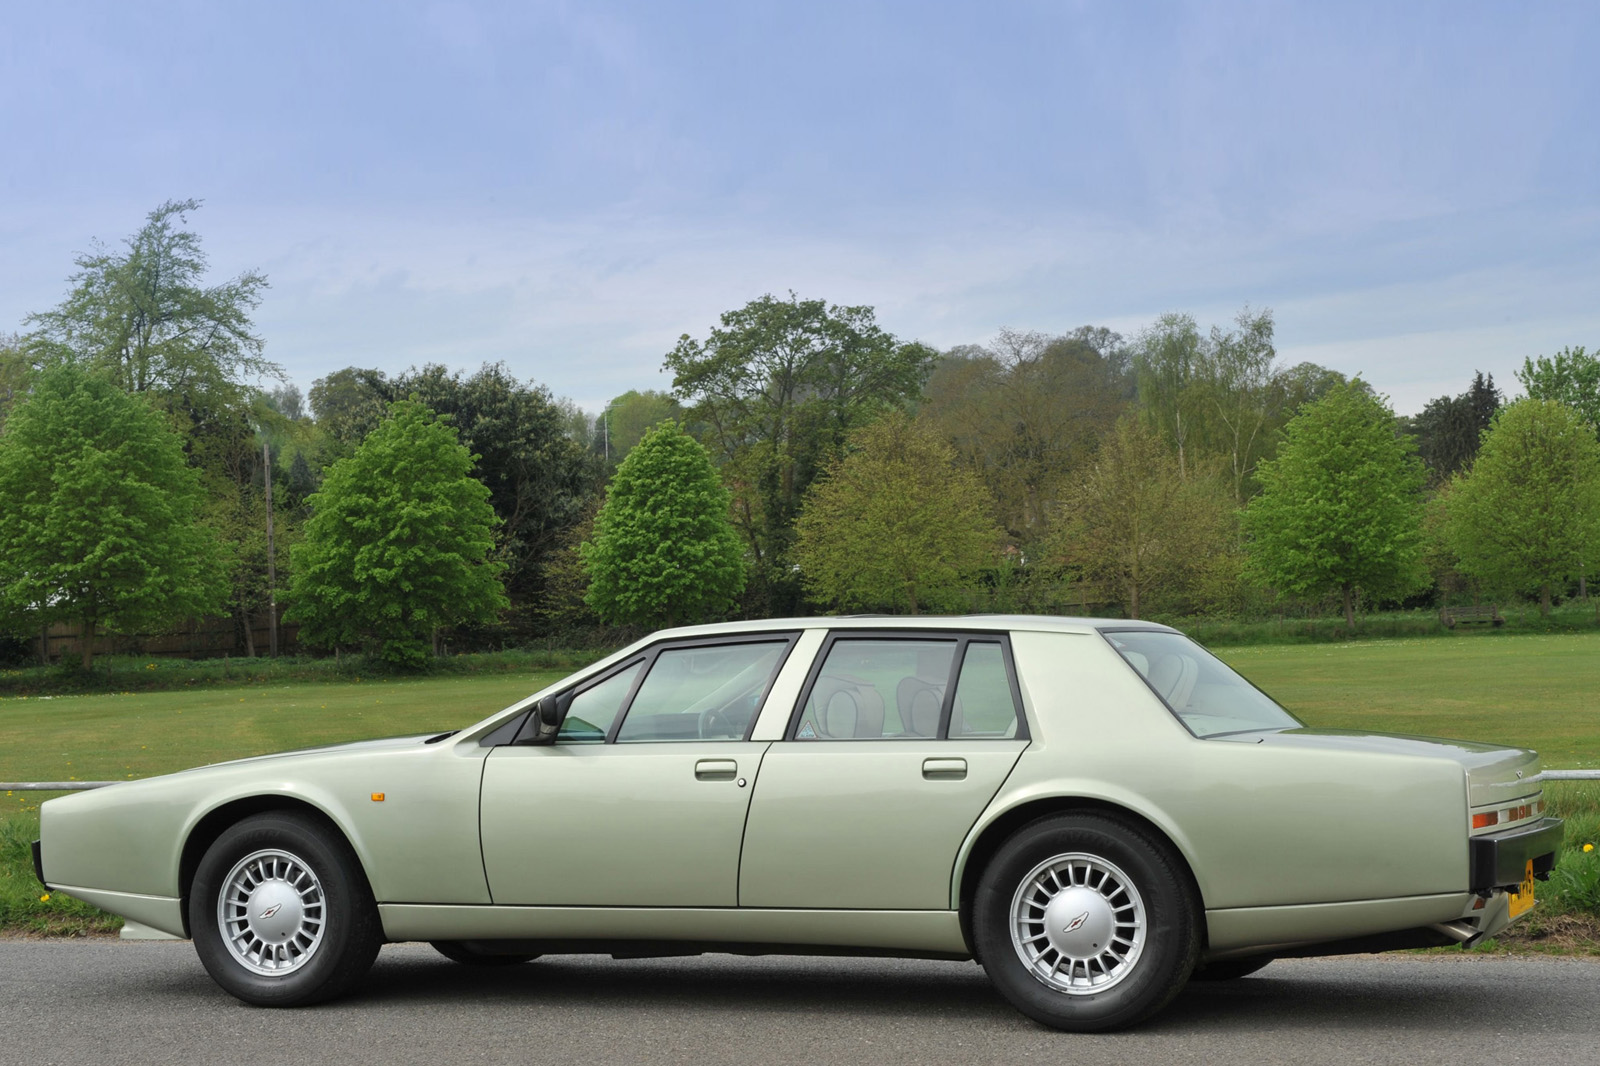 Buy An Aston Martin Lagonda – It’s An Investment Say Specialists | Carscoops